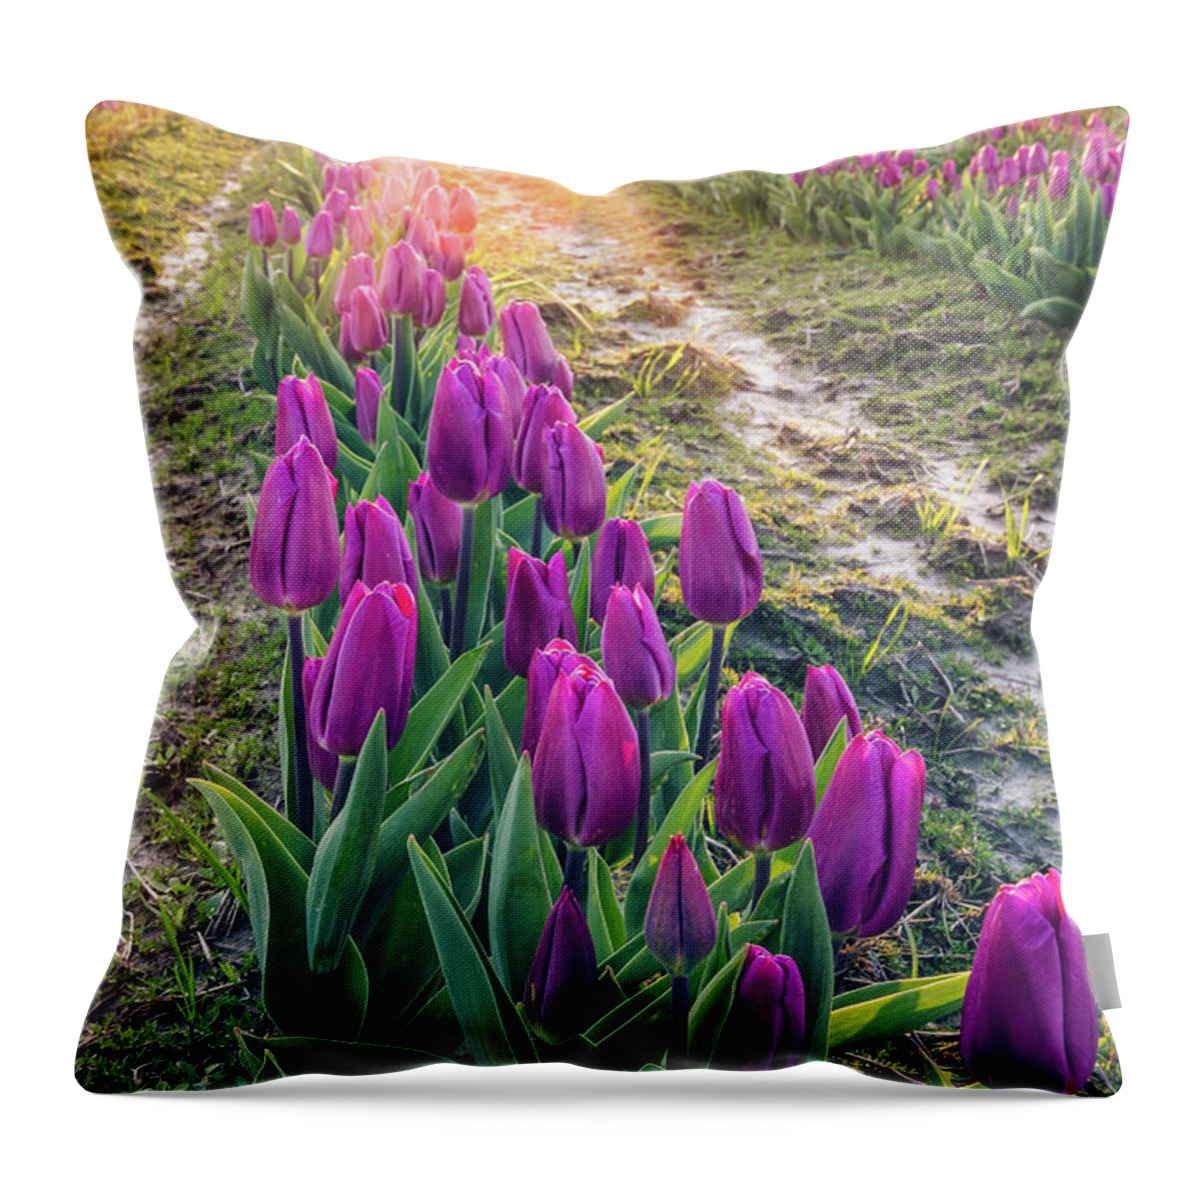 Tulips Throw Pillow featuring the photograph Jewel Tone Tulips by Michael Rauwolf